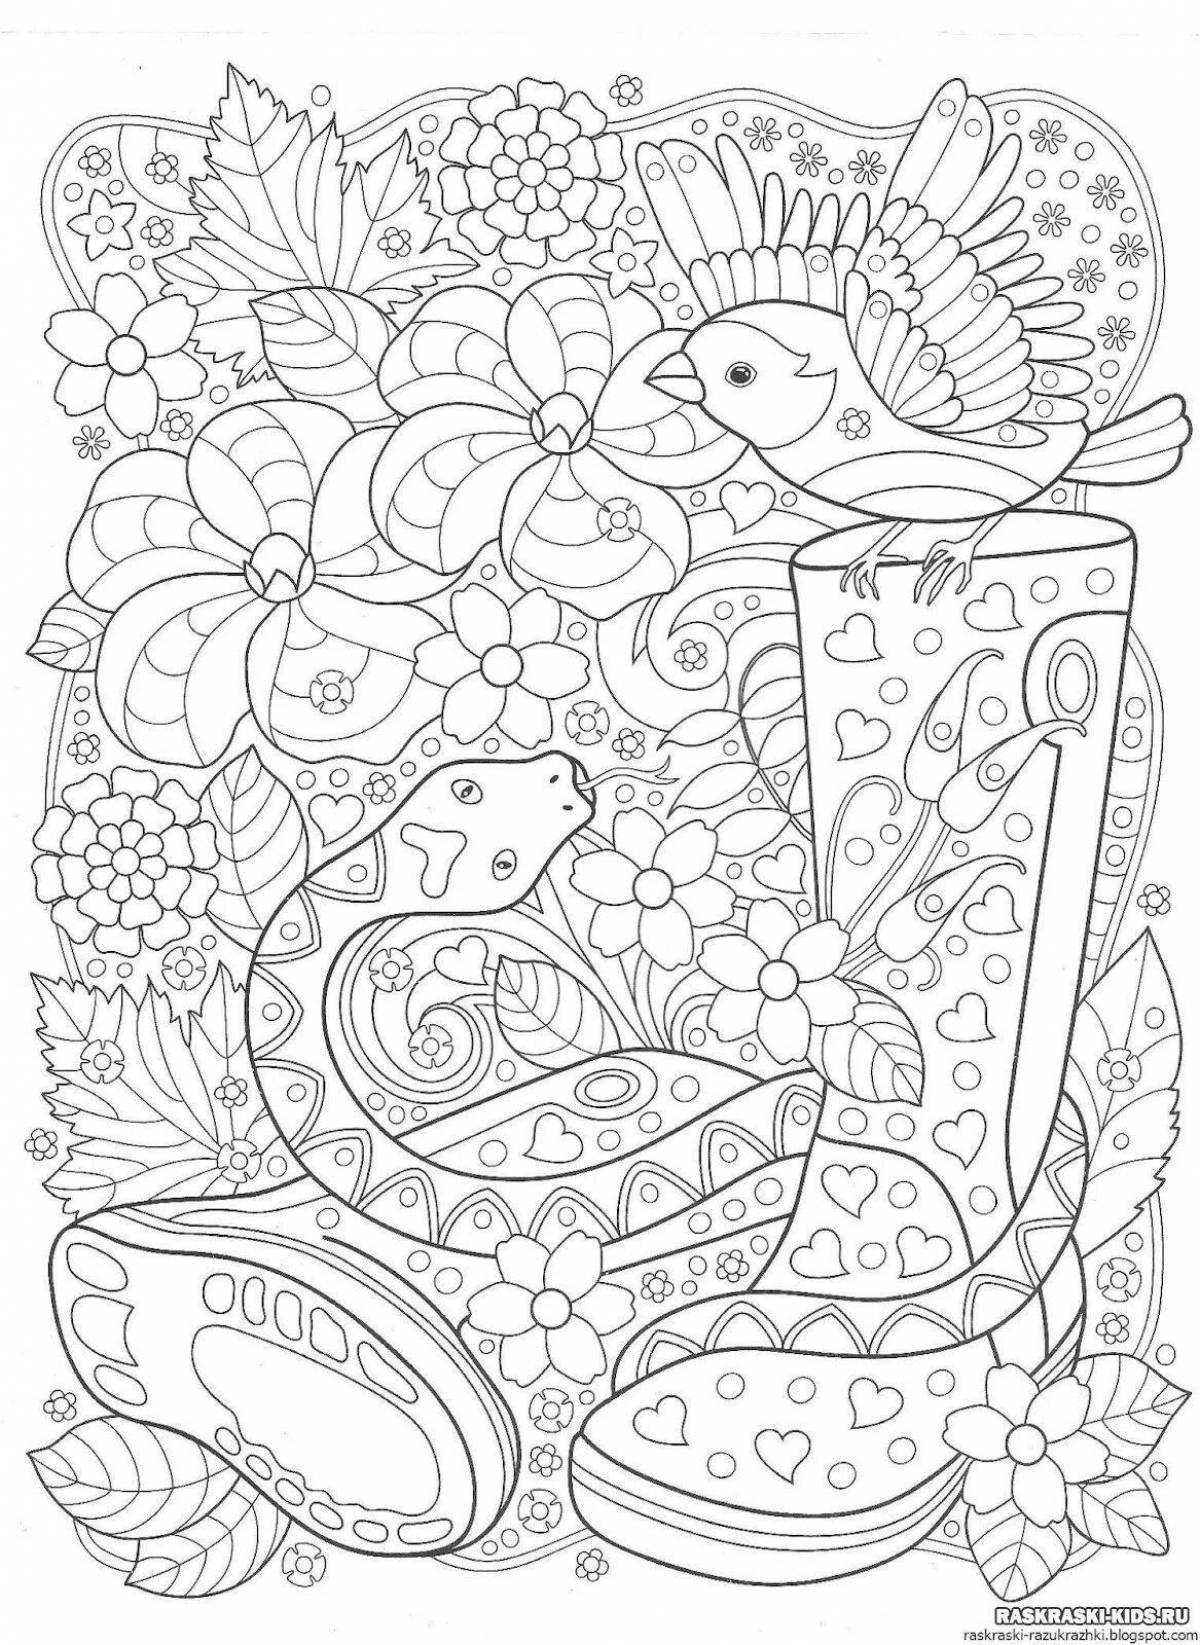 Joyful anti-stress coloring book for children 10 years old